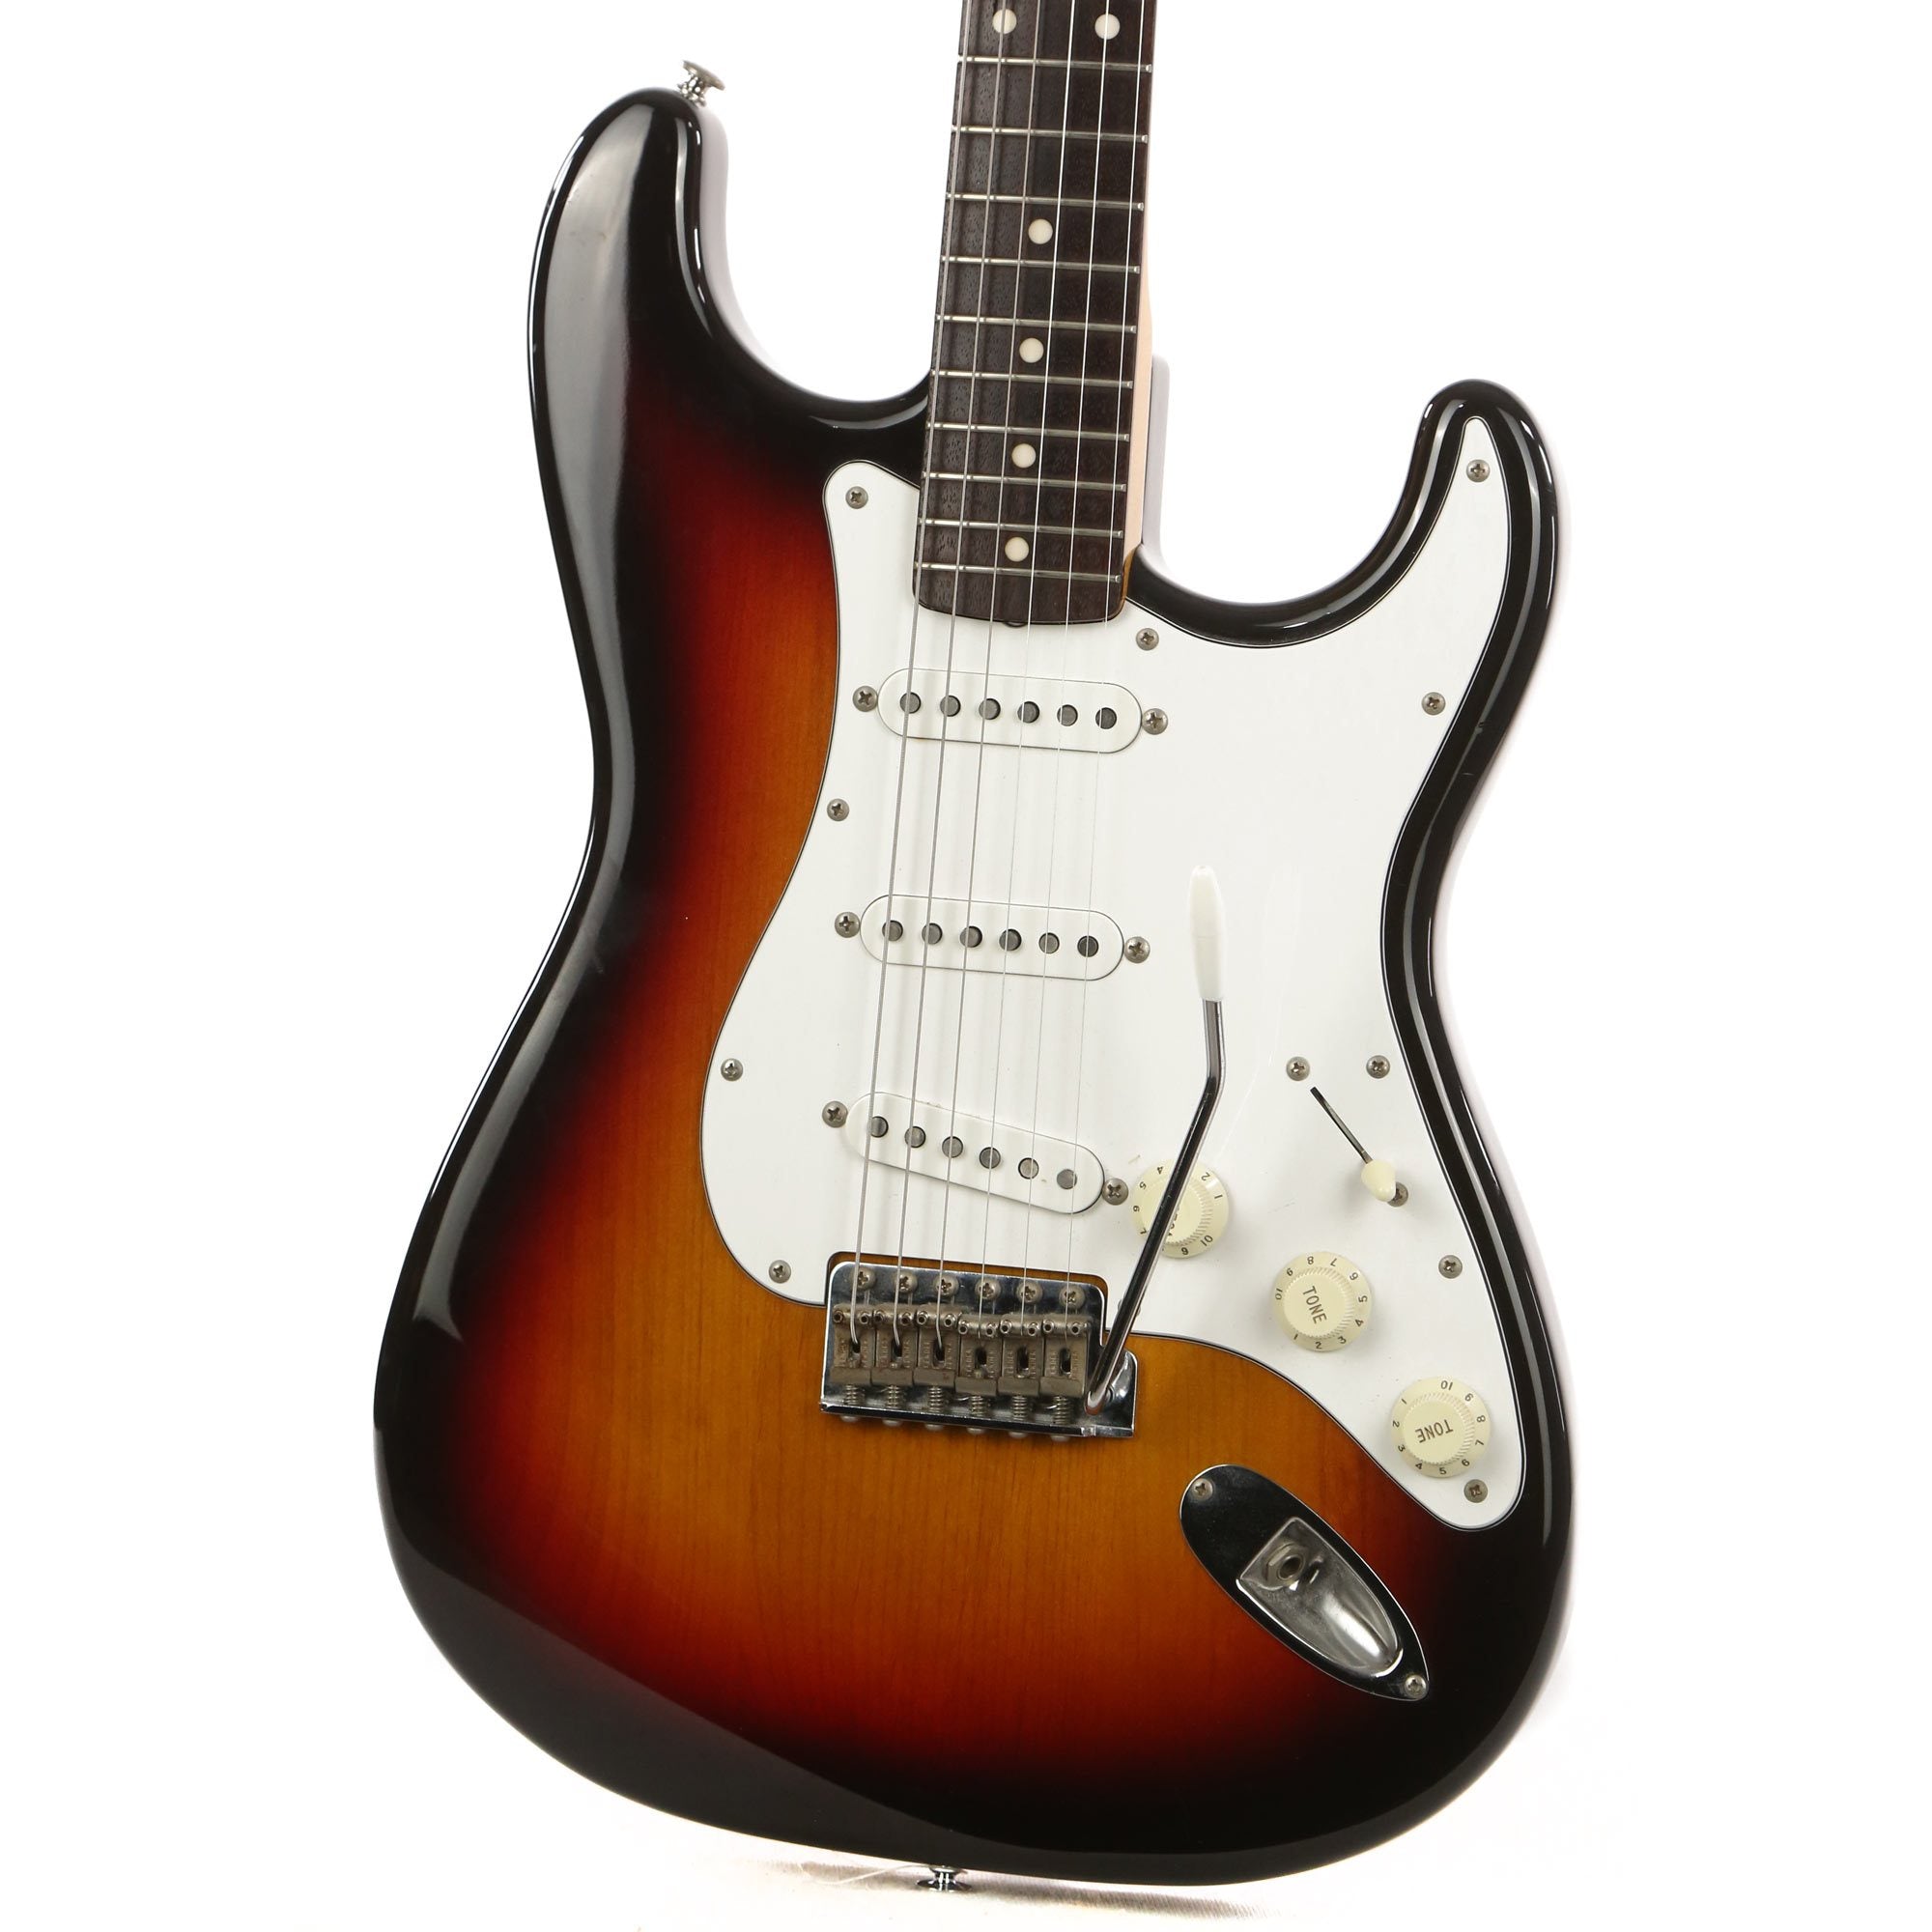 Fender Crafted in Japan Stratocaster 3-Tone Sunburst | The Music Zoo